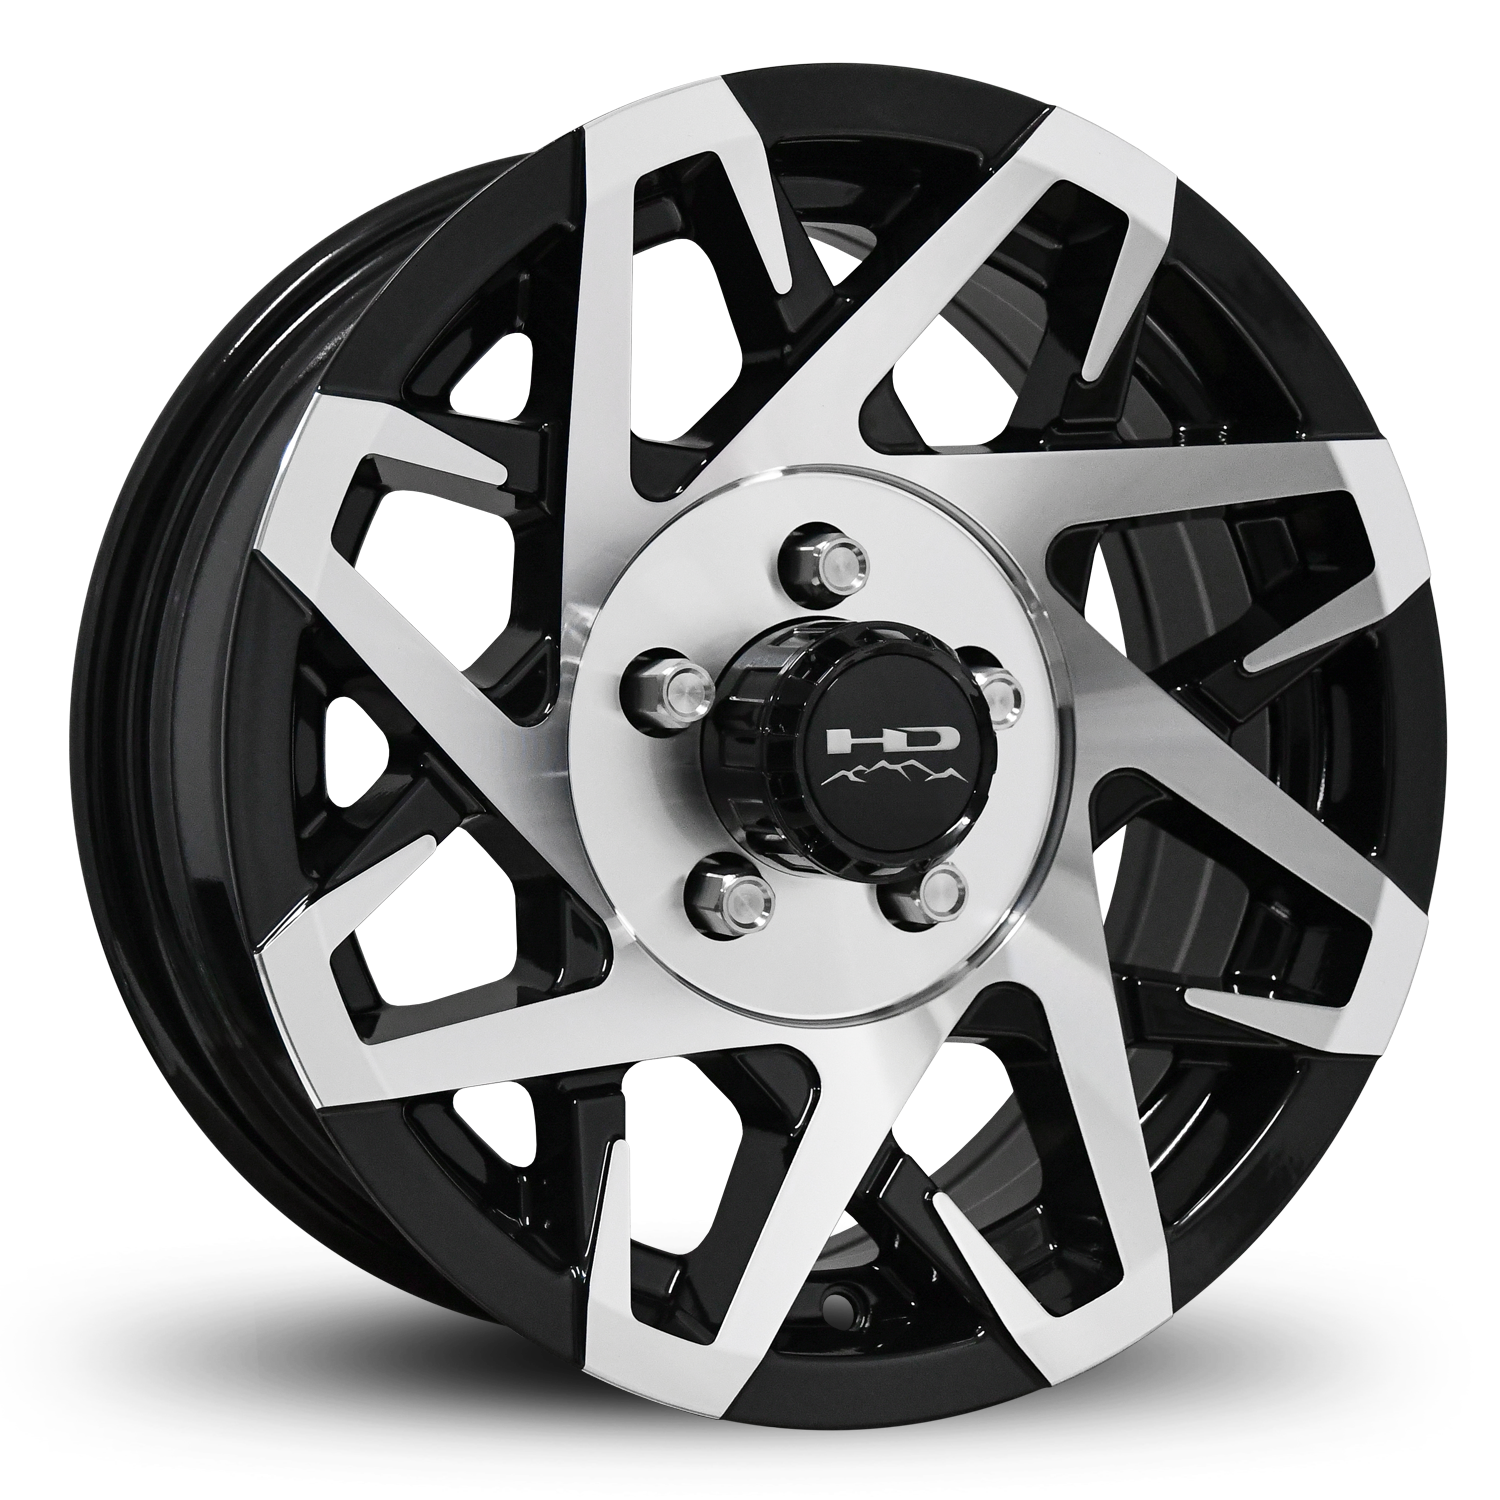 HD Off-Road Canyon Custom Trailer Wheel Rims in 14x5.5 Gloss Black Machined Face with Center Cap & Logo fits 5x4.50 / 5x114.3 Axle Boat, Car, RV, Travel, Concession, Horse, Utility, Lawn & Garden, & Landscaping.